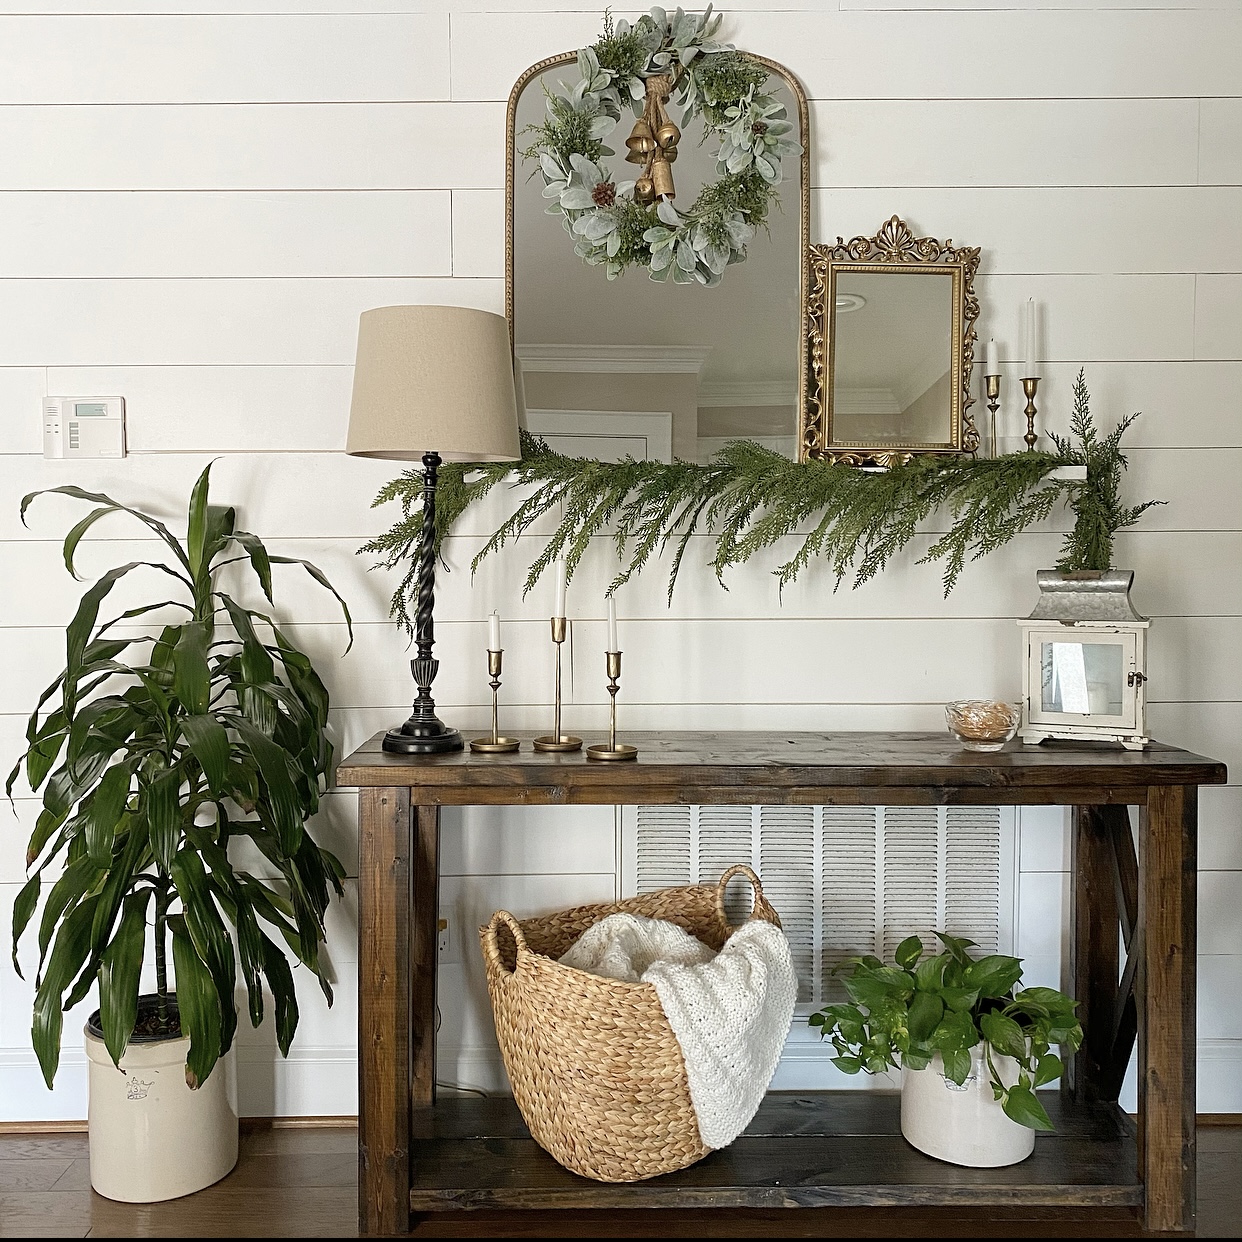 Foyer table decorated for winter using greenery and plants.